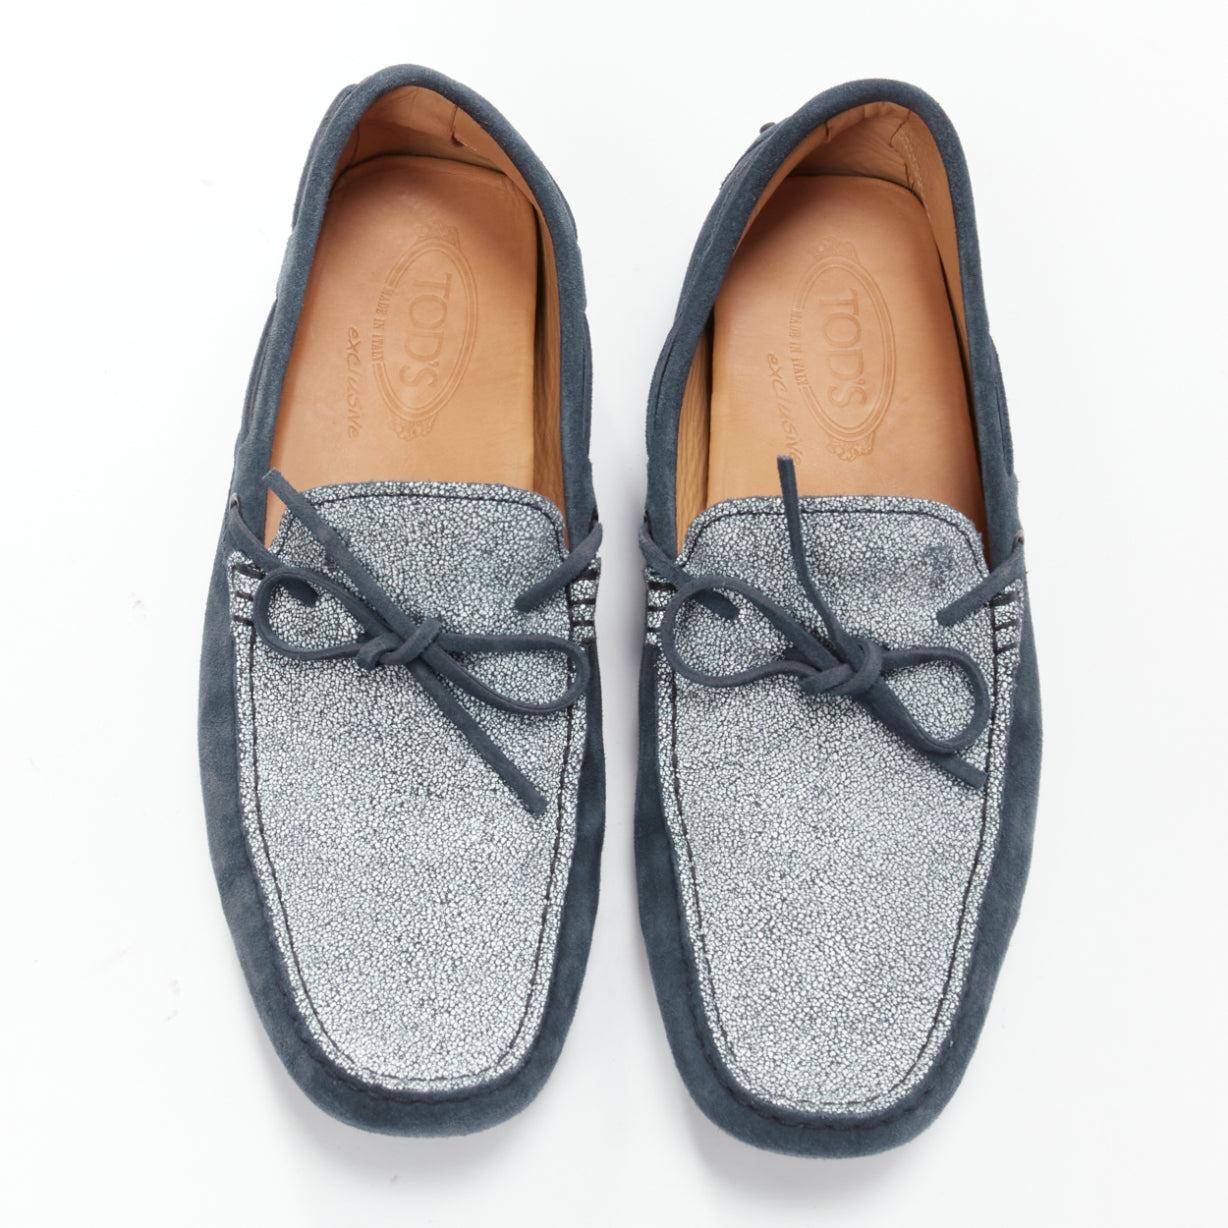 TOD'S Gommino navy suede white top dot sole driving loafers UK8 EU42
Reference: JSLE/A00086
Brand: Tod's
Collection: Gommino
Material: Leather
Color: Navy, White
Pattern: Solid
Closure: Self Tie
Lining: Nude Leather
Extra Details: Signature Gommino